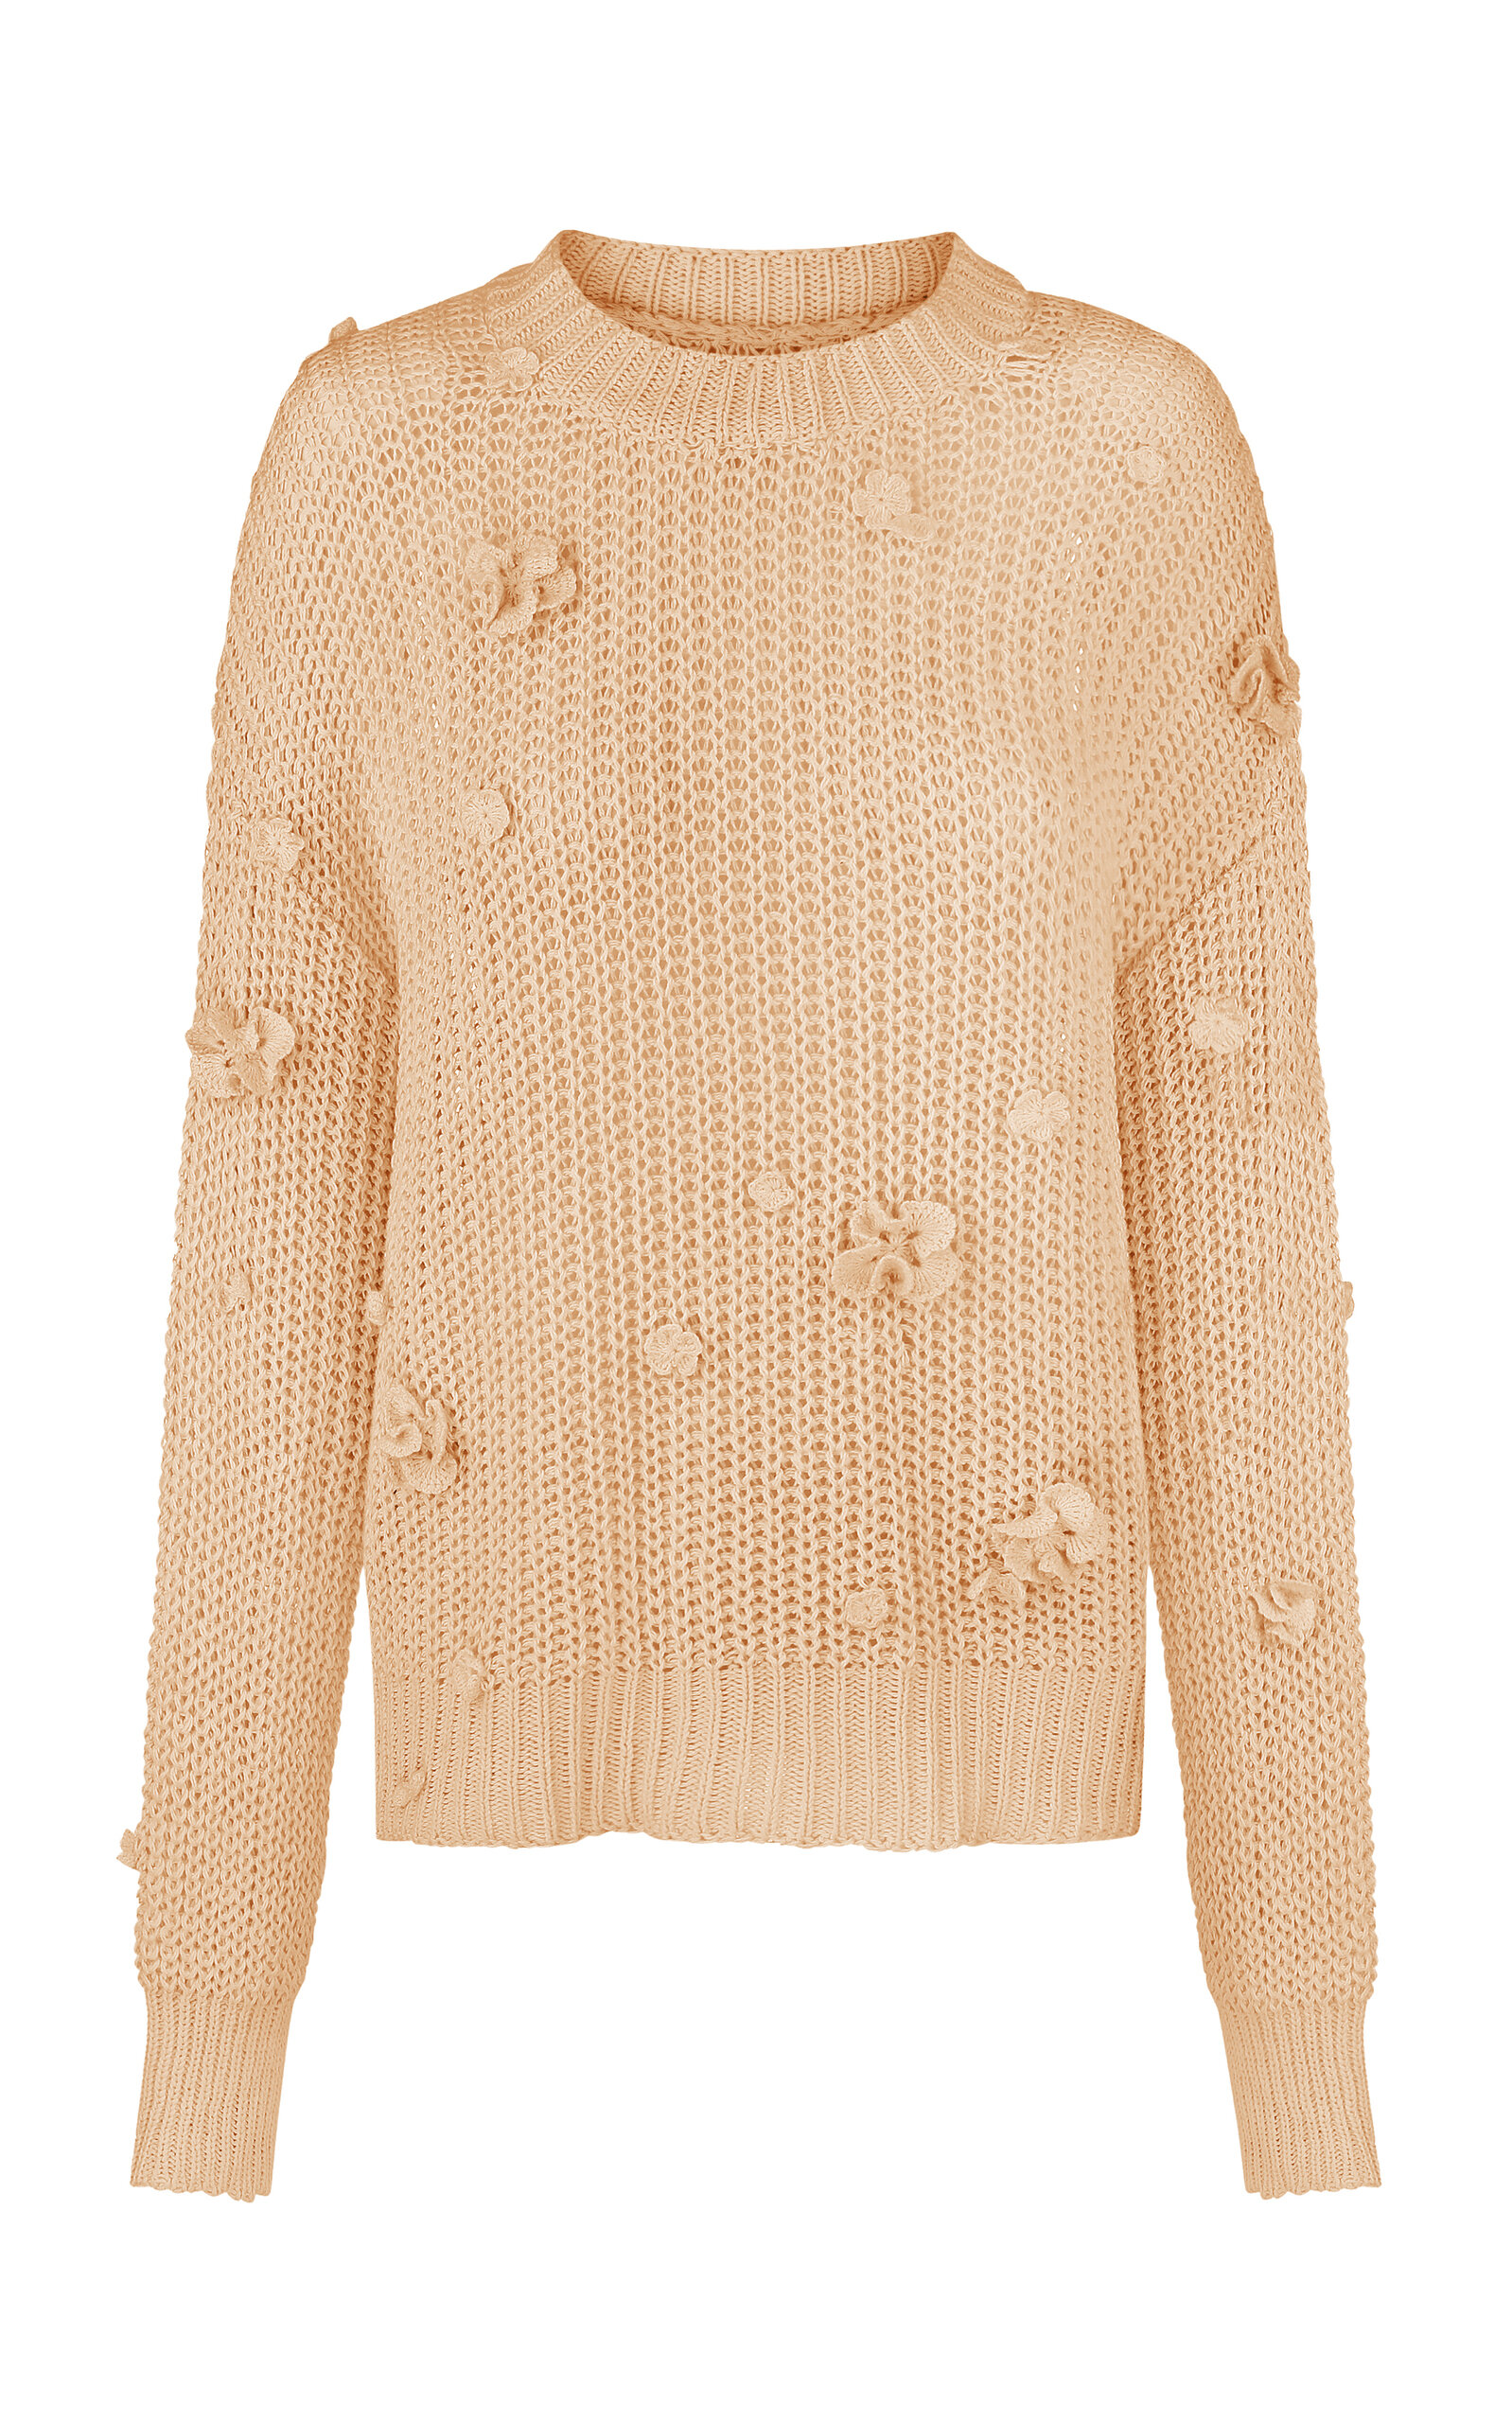 Shelly Flower-Embellished Organic Cotton Sweater